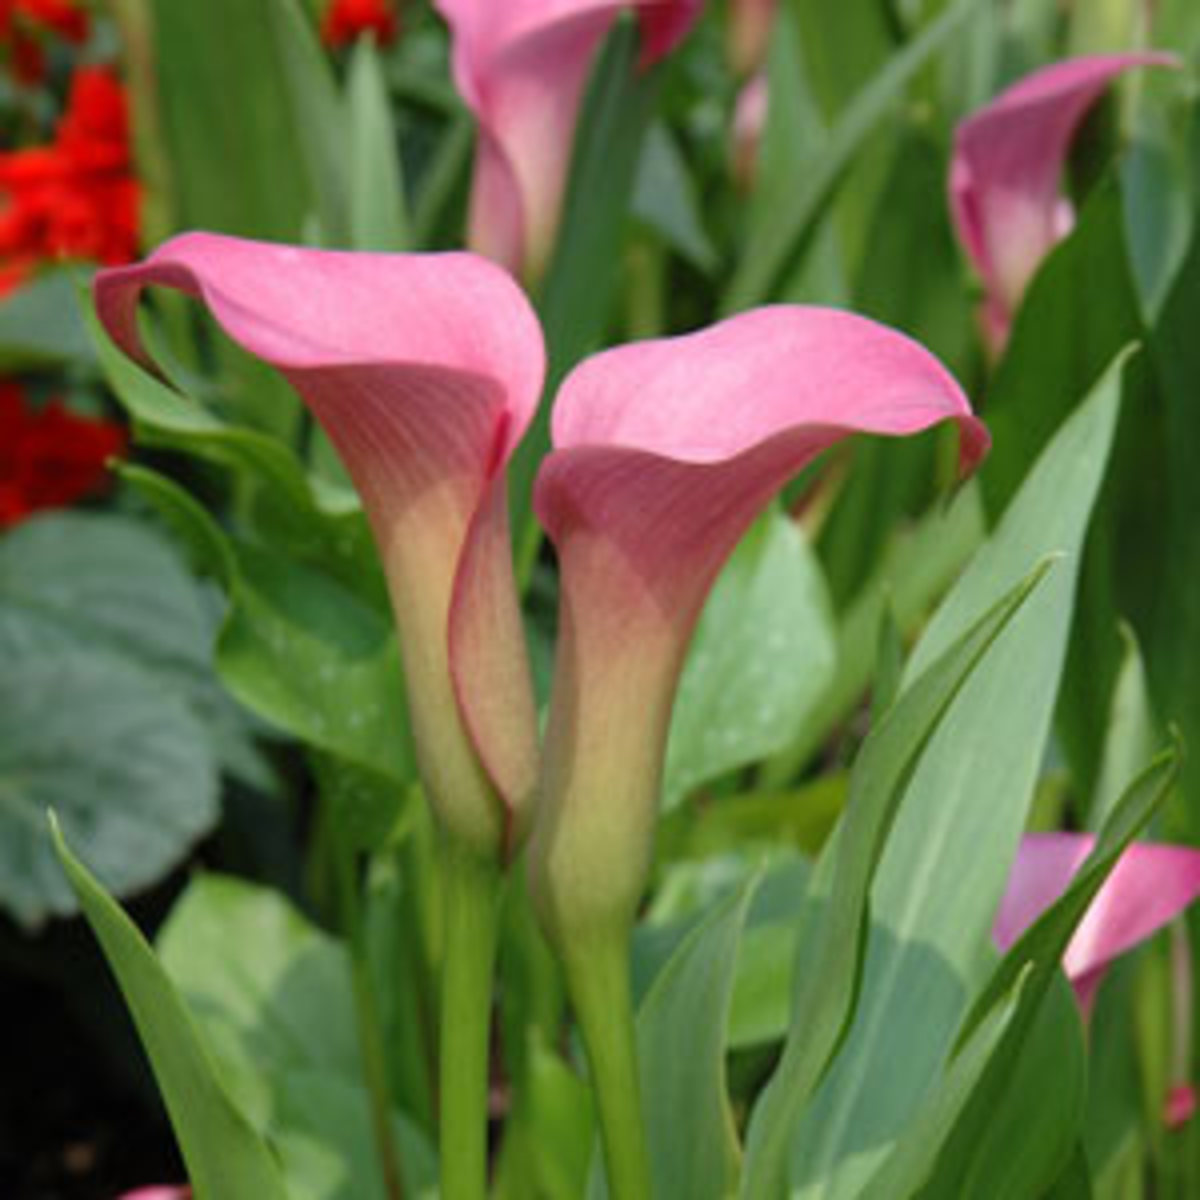 Lilies or a Lily can kill your cat within hours! HubPages